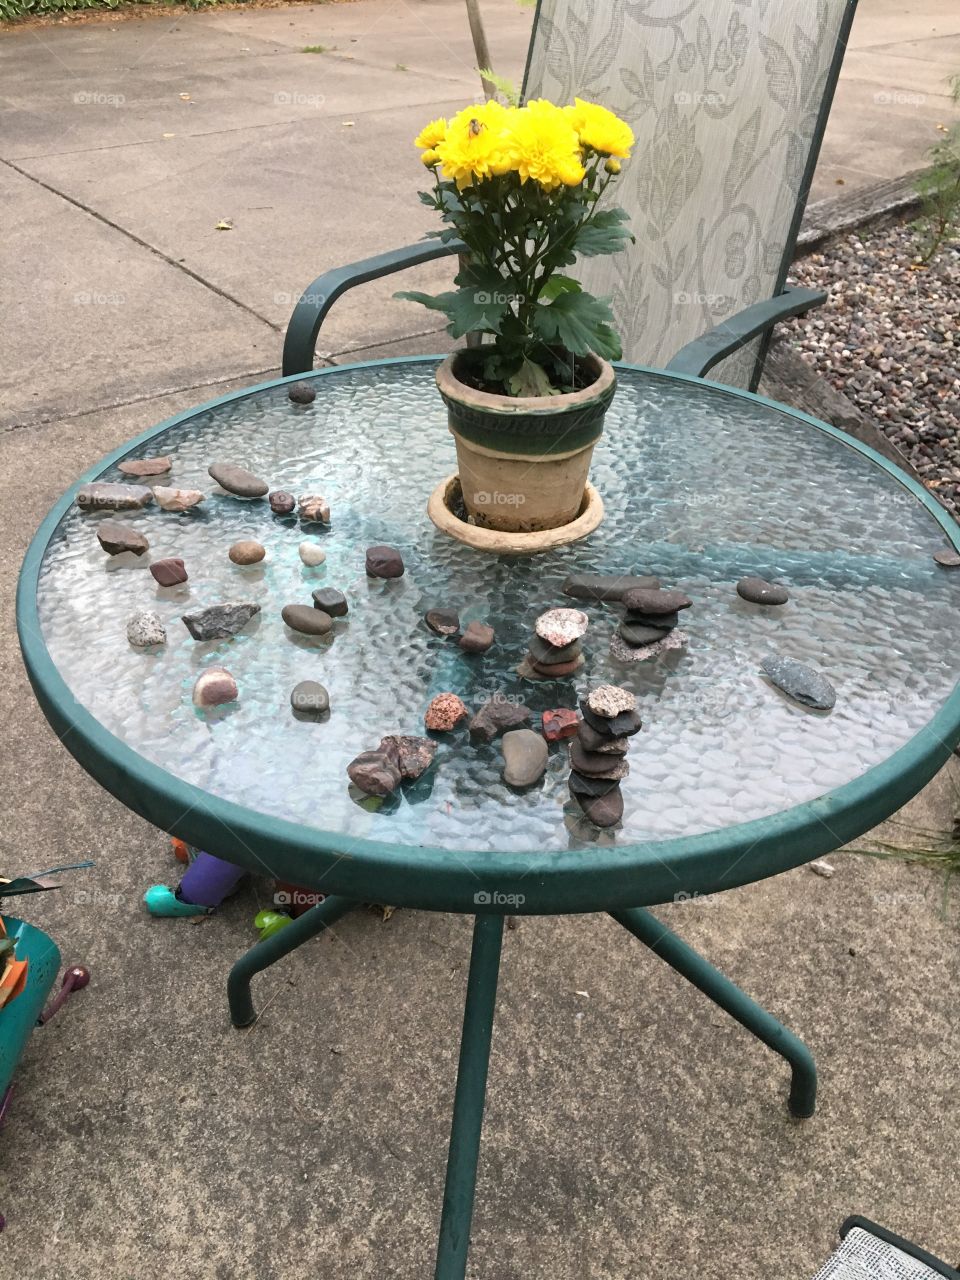 Making cairns